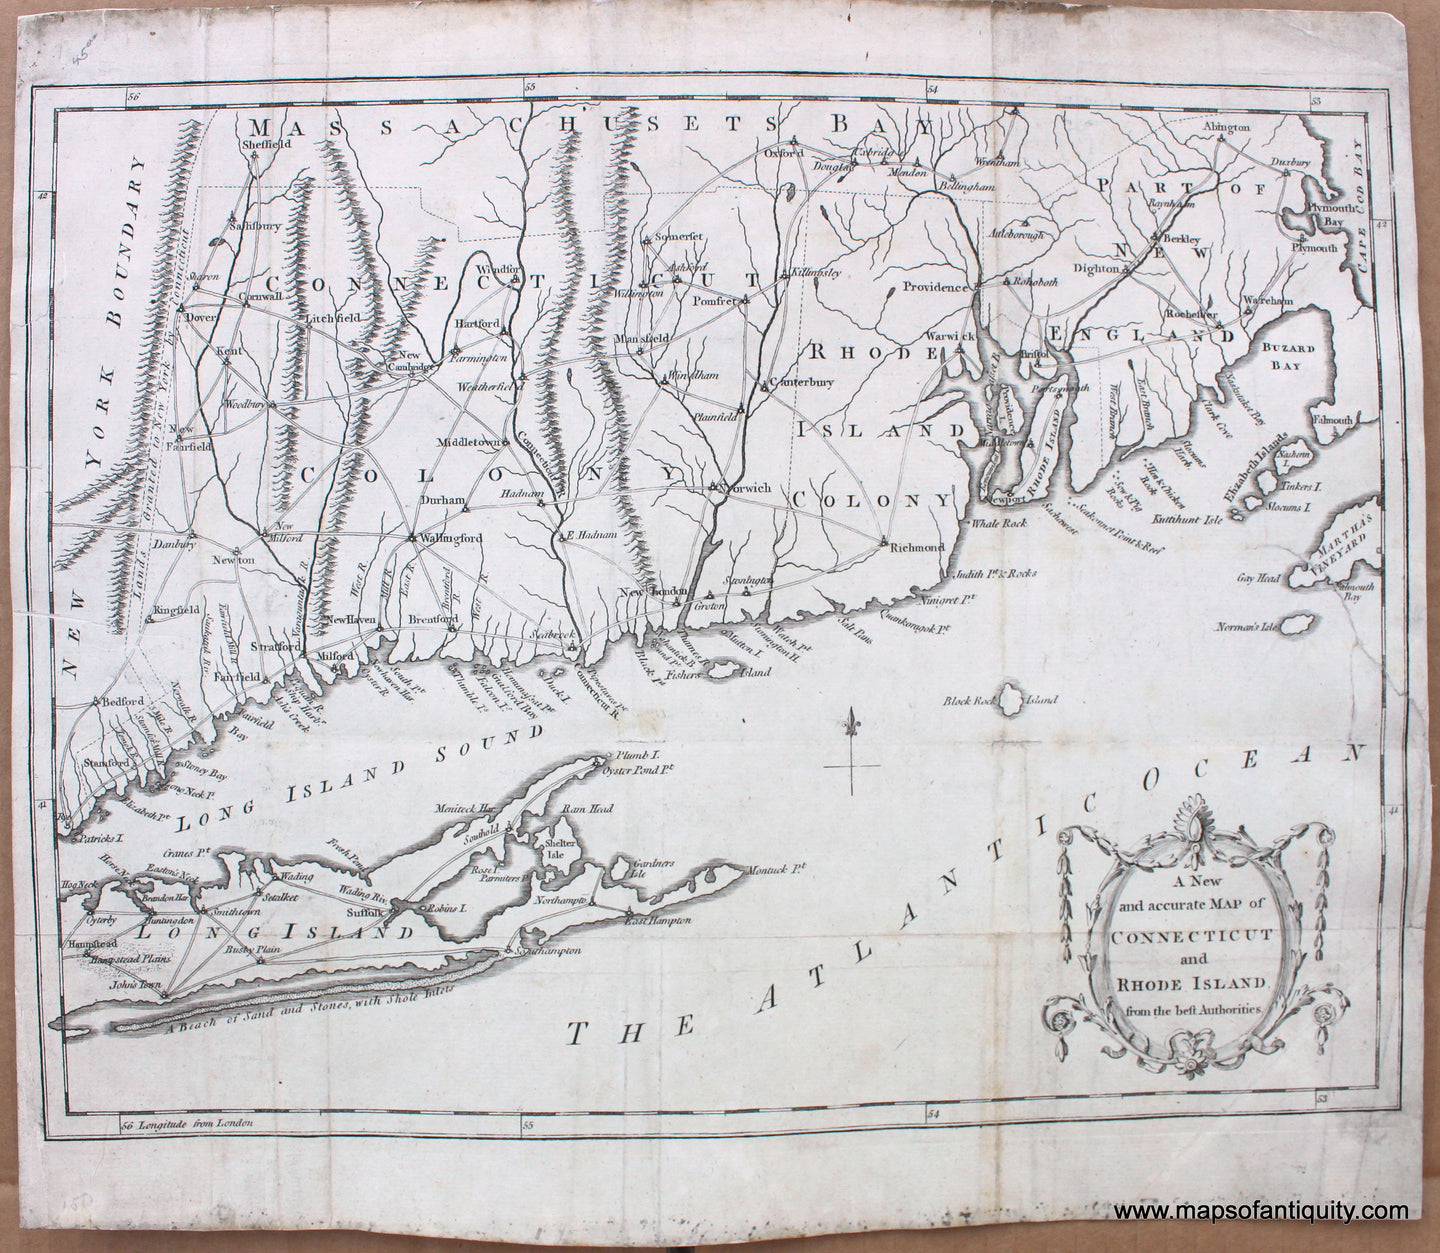 1780 - A New and Accurate Map of Connecticut and Rhode Island from the best Authorities. - Antique Map